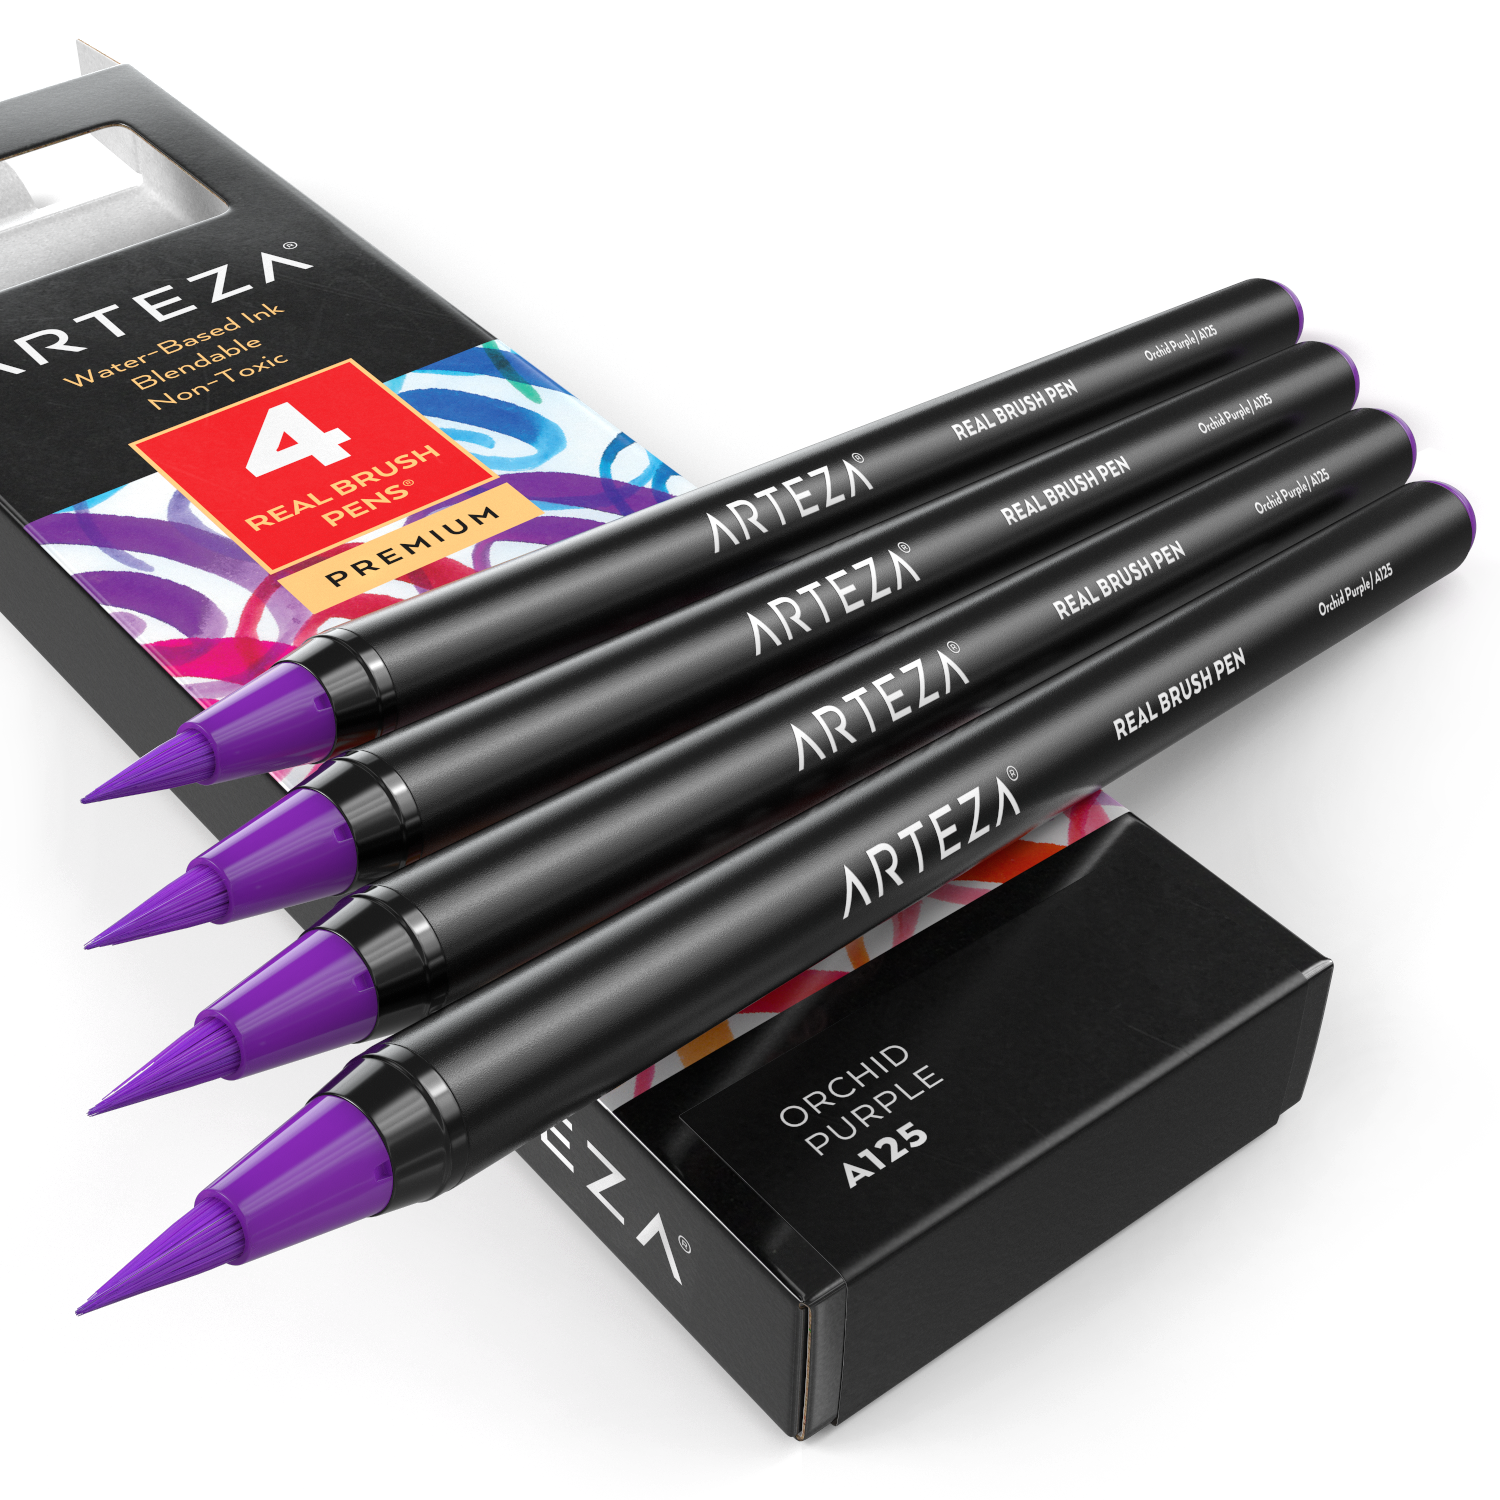 Arteza Disposable Fountain Pens, Pack of 12, Medium 0.9-mm Nib, Smooth-Writing Quick-drying Black Ink Pen, Art Supplies for Professionals, Students, A